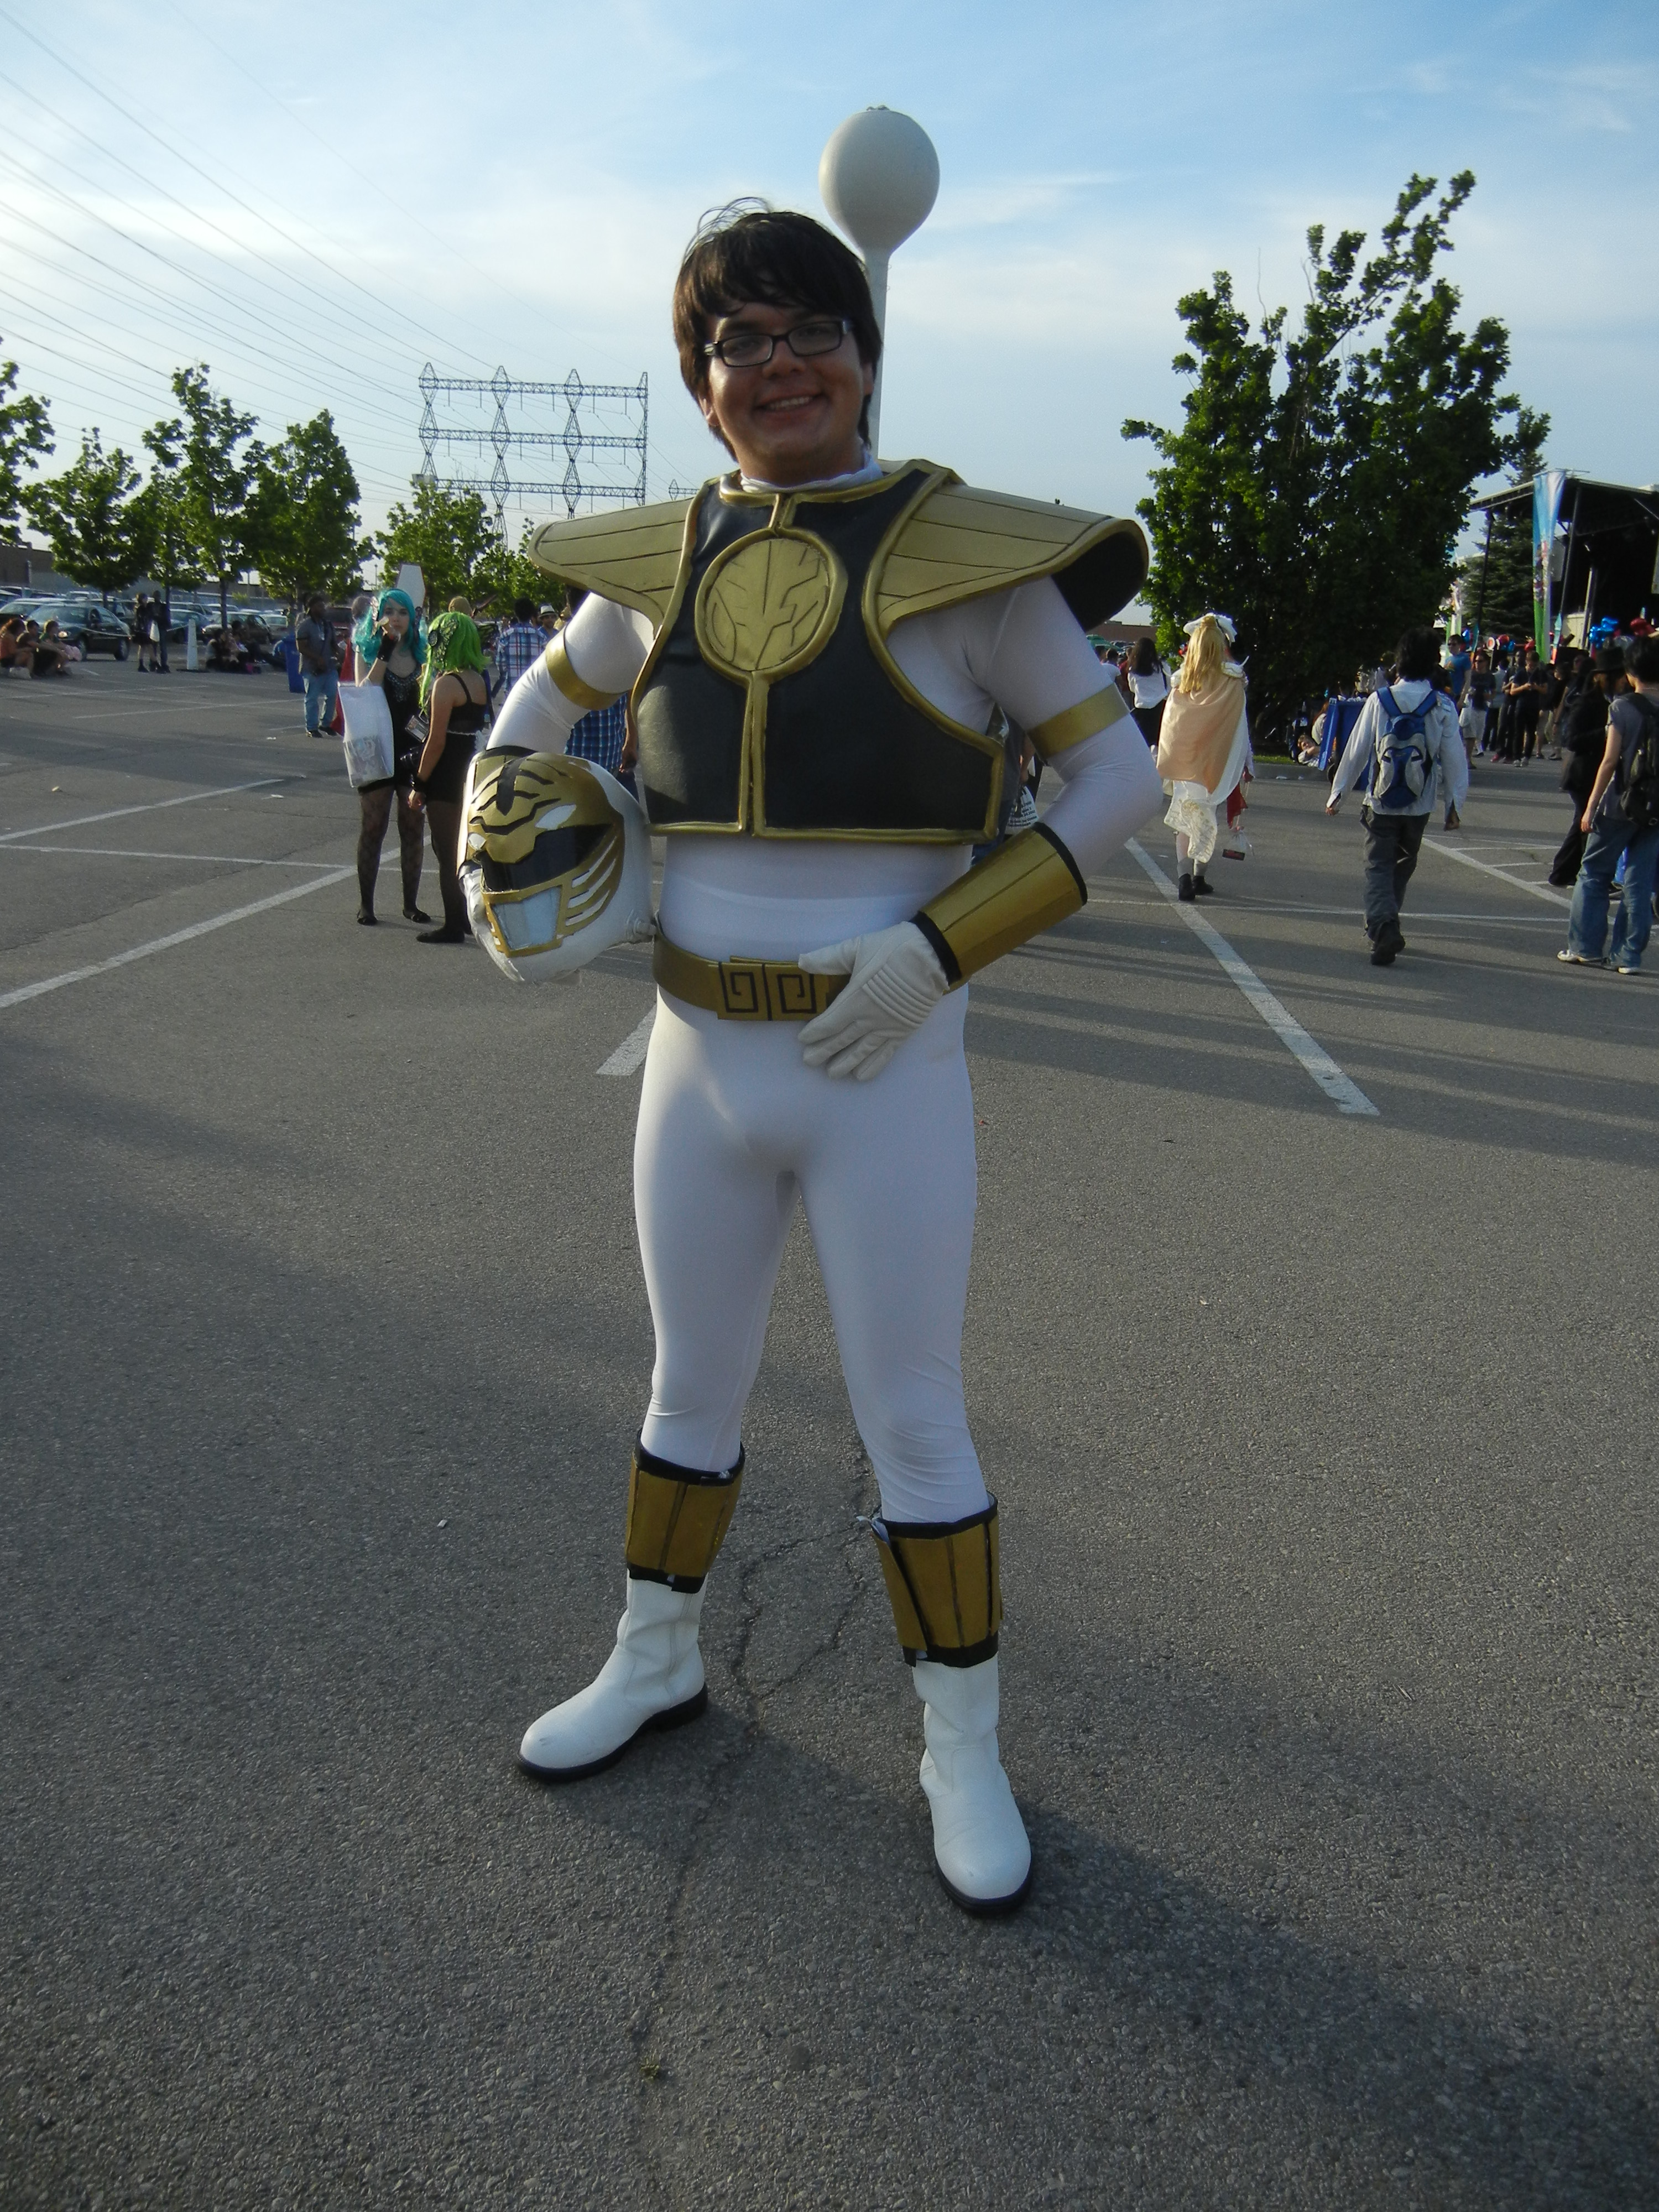 Anime North 2012 - Power Rangers Cosplay by jmcclare on ...